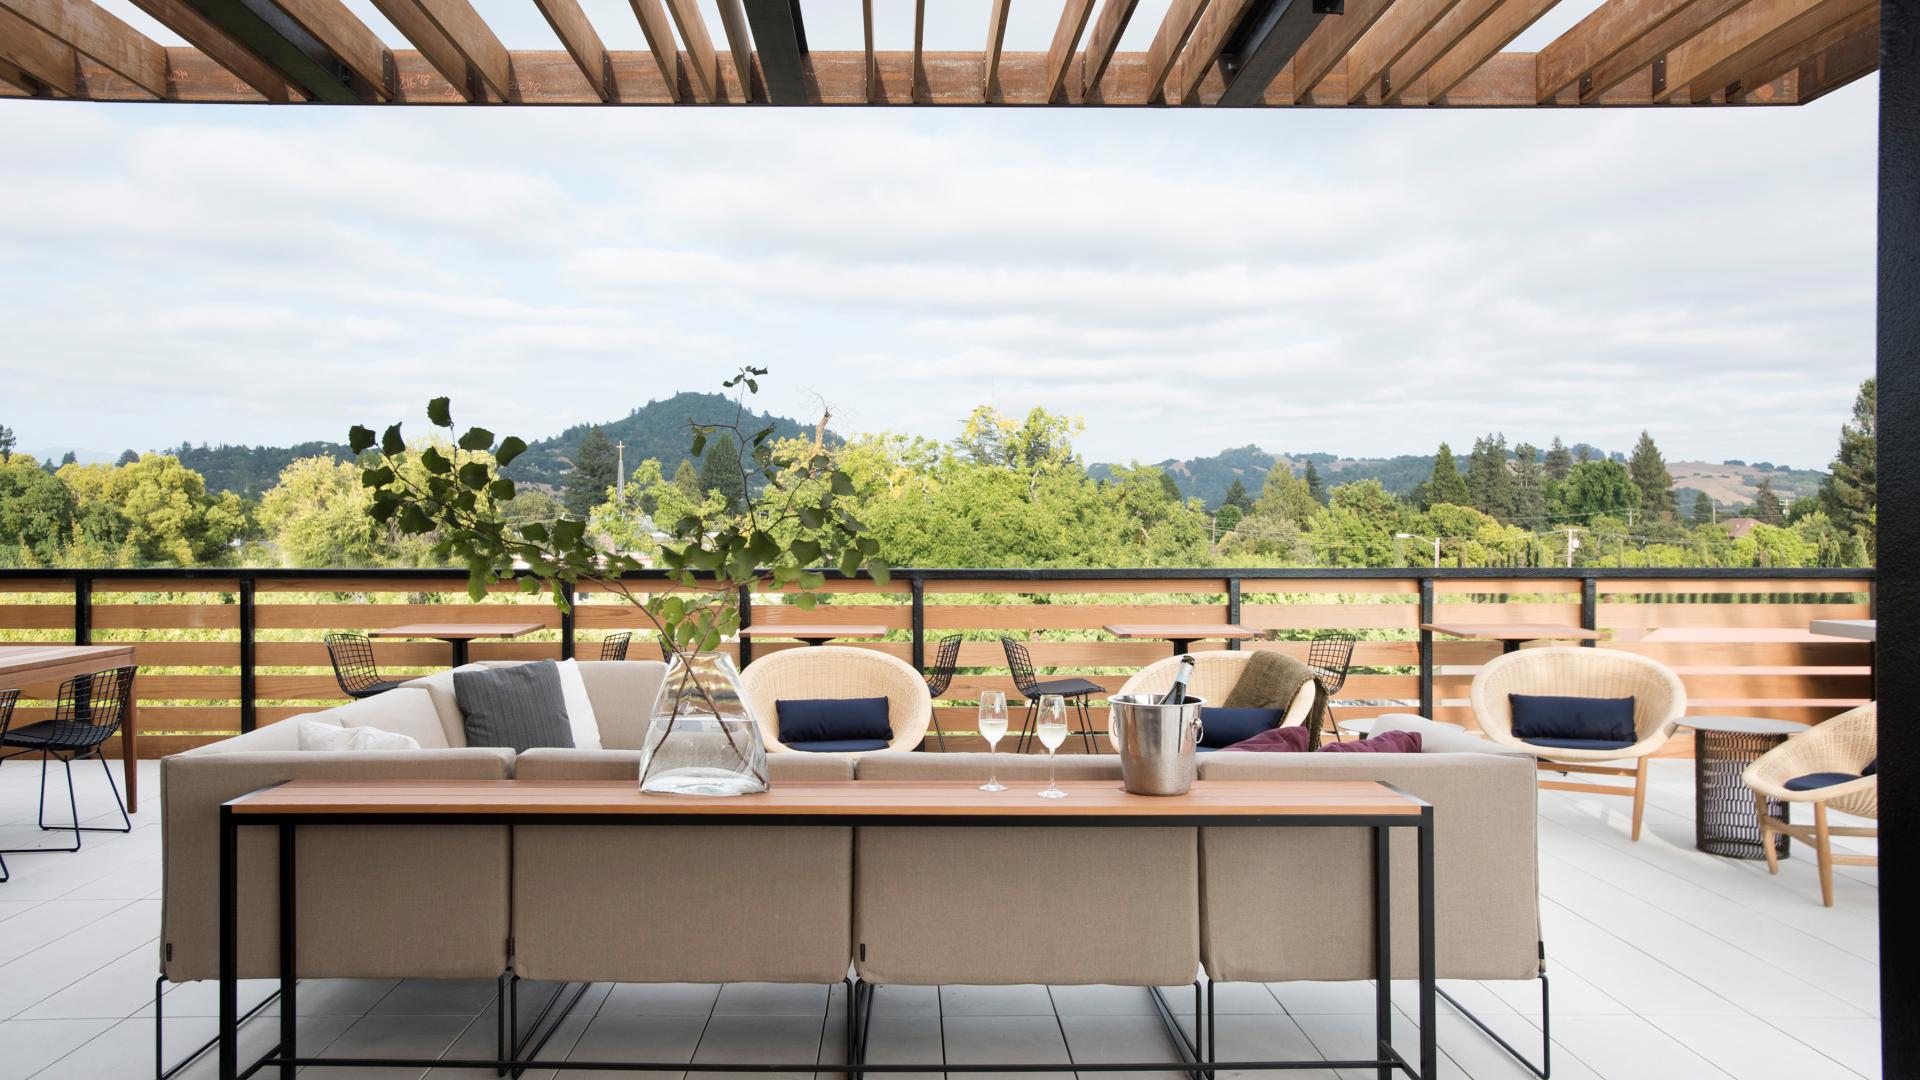 Rooftop terrace at Harmon Guest House over looking the Healdsburg mountains.